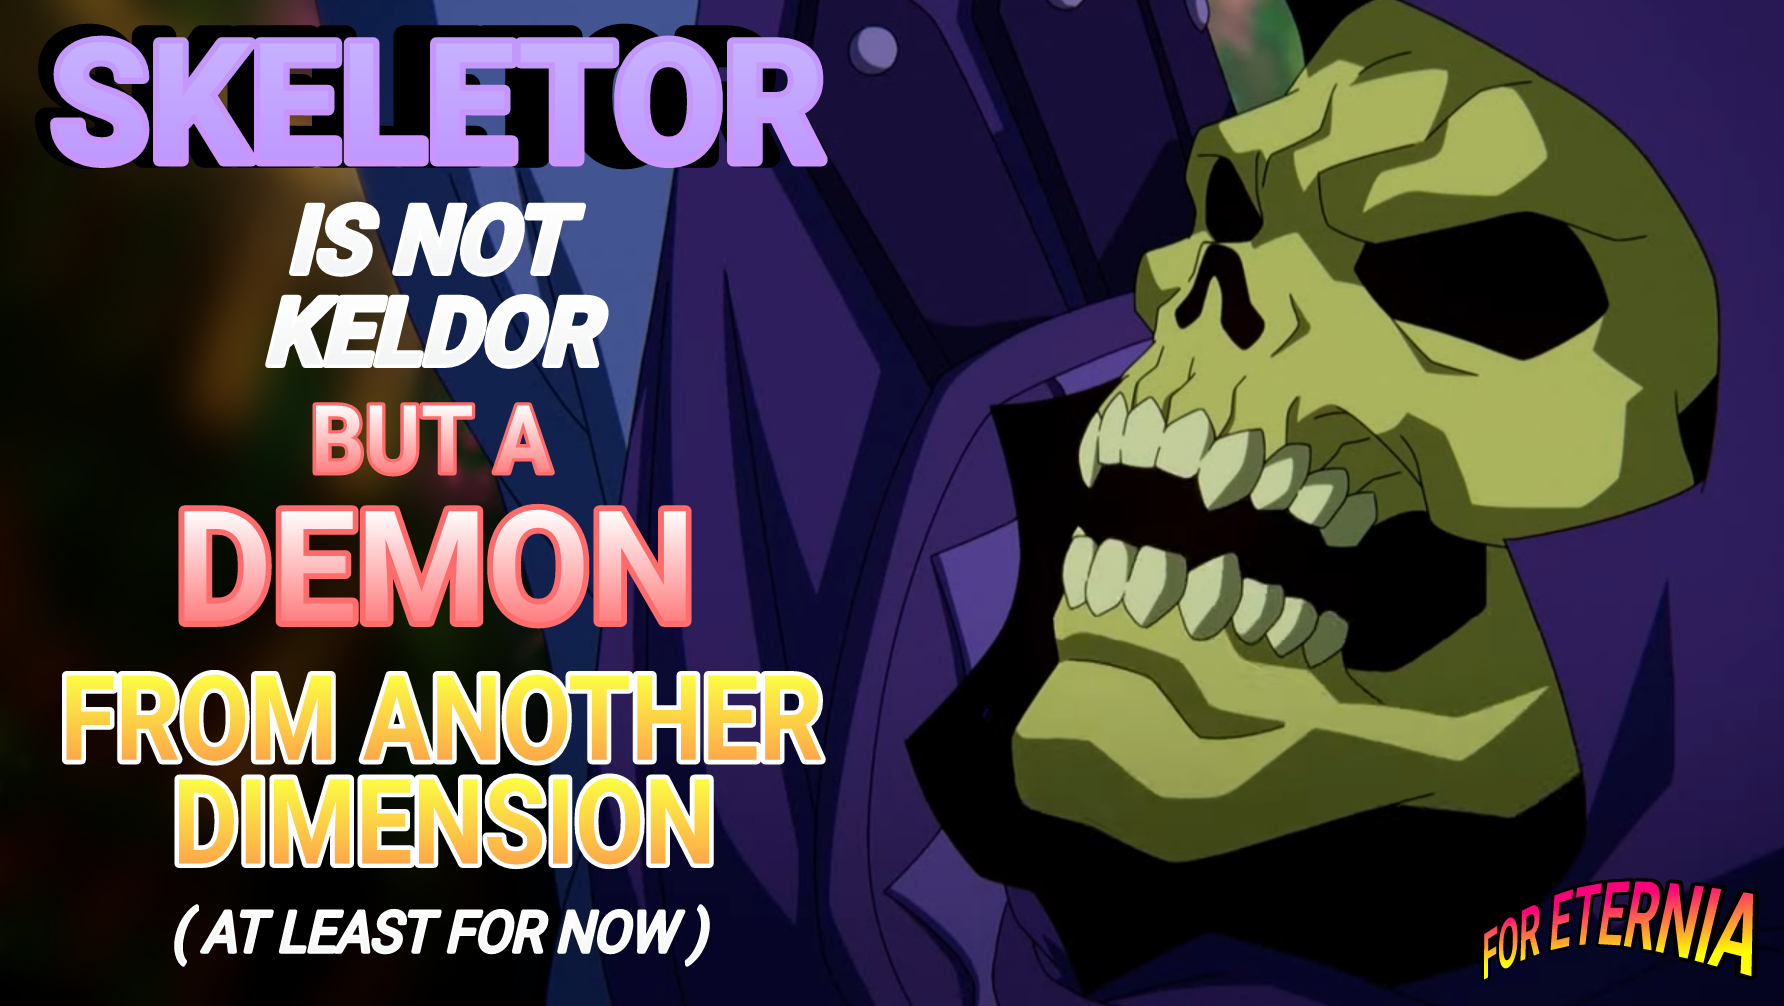 Skeletor is not Keldor, but a Demon from another Dimension in ”Masters of the Universe: Revelation” (at least for now)